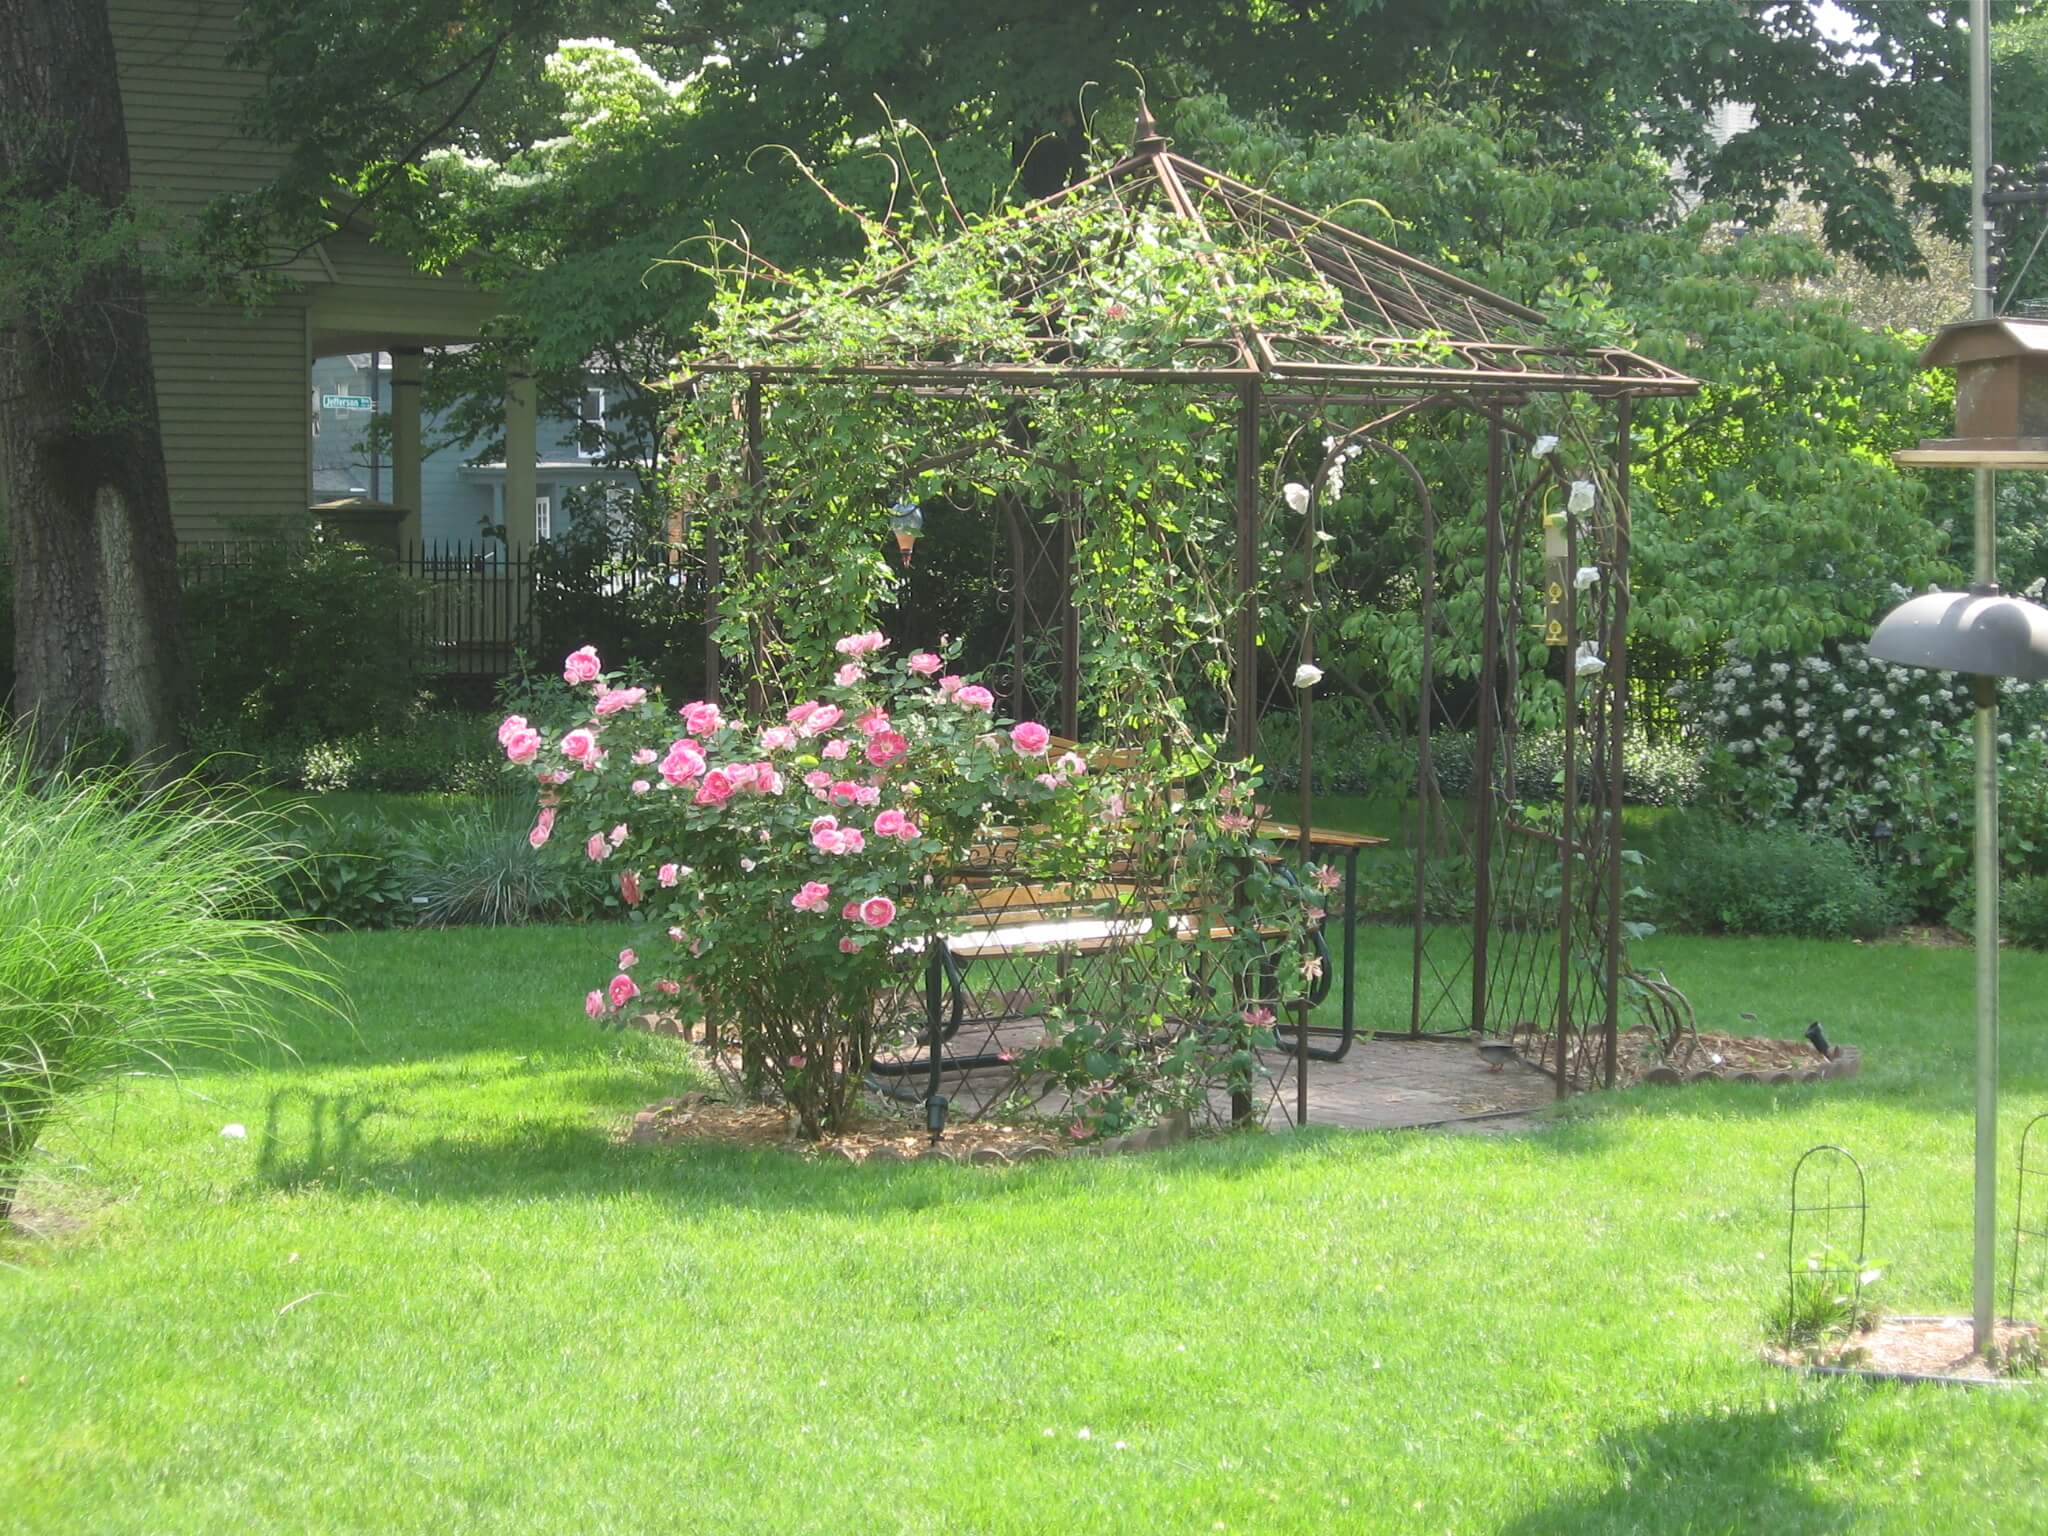 Garden gazebo with seating space beneath in the yard rose bush beside it and vines covering half the structure